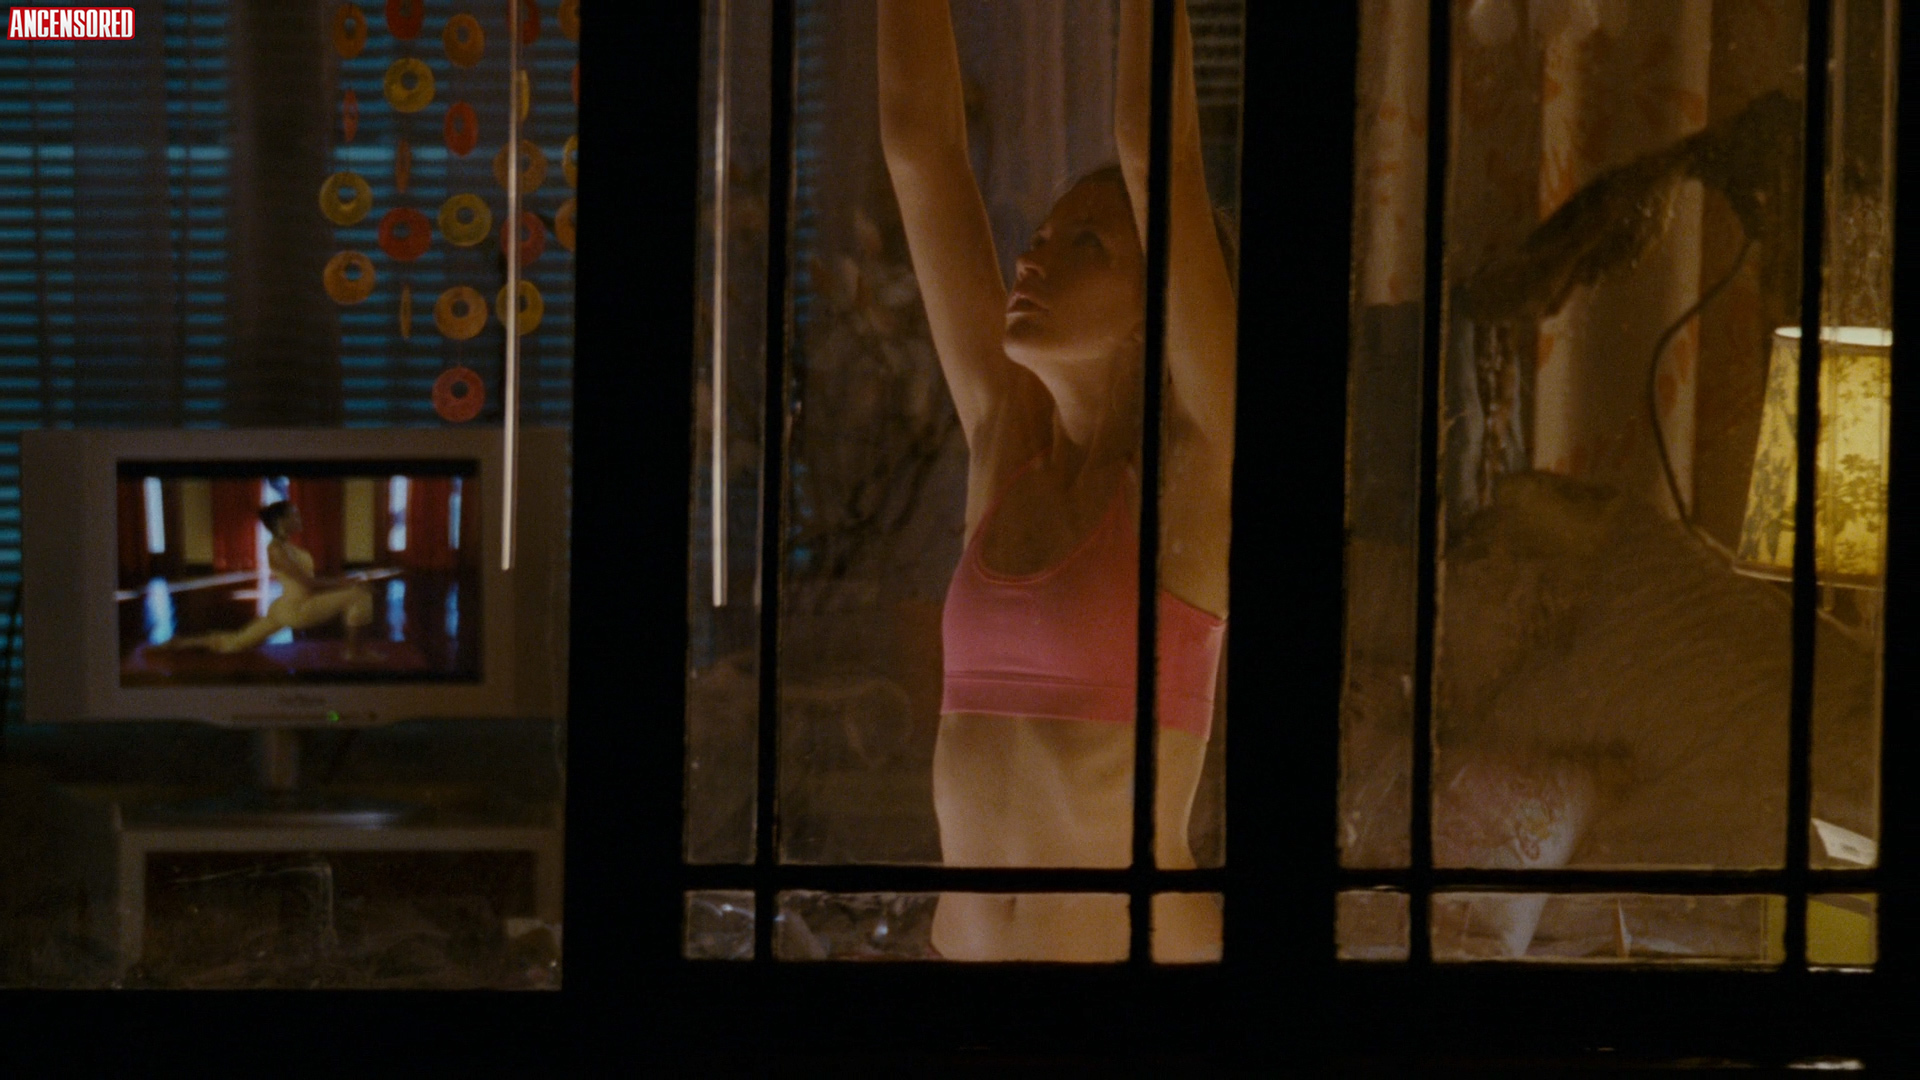 Naked Sarah Roemer in Disturbia < ANCENSORED